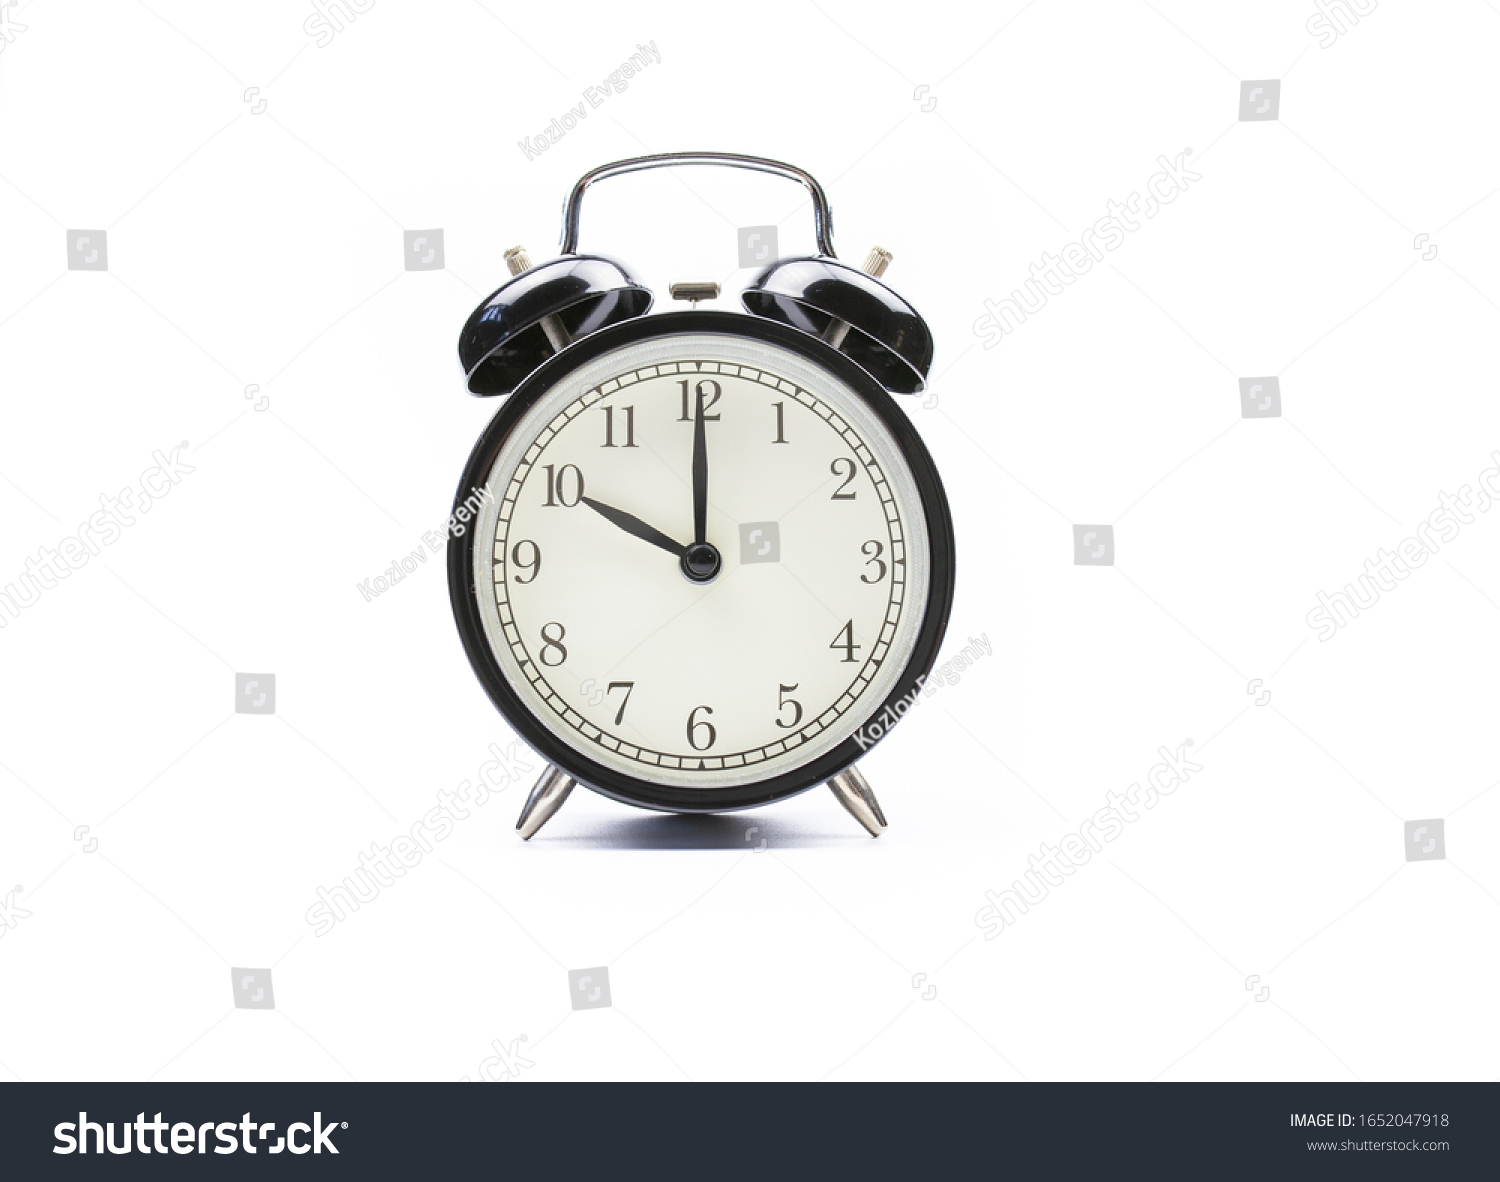 Black vintage alarm clock on a white background shows the time ten hours #1652047918